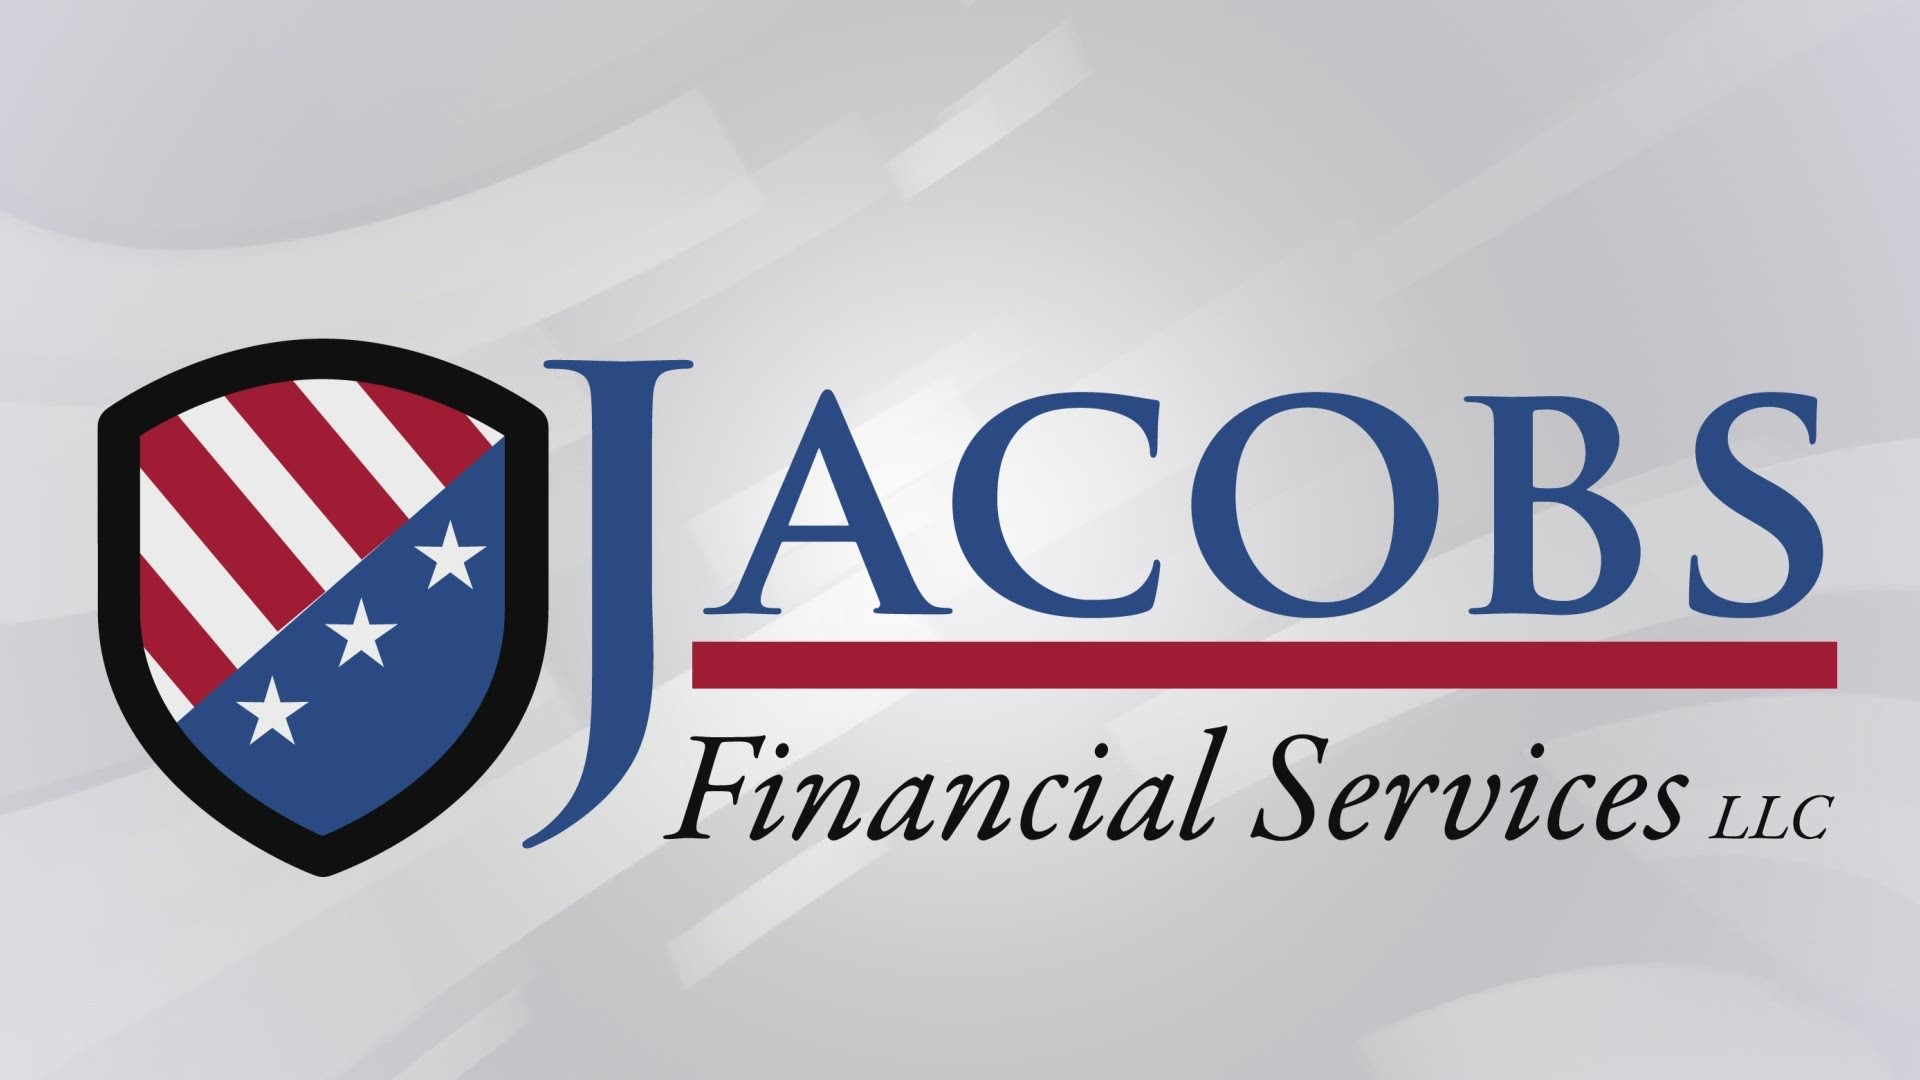 How much thought do you give to your retirement?  SOME day you’ll get to it, right?  Well Tom Jacobs from Jacobs Financial Services says that “some day” … is now!